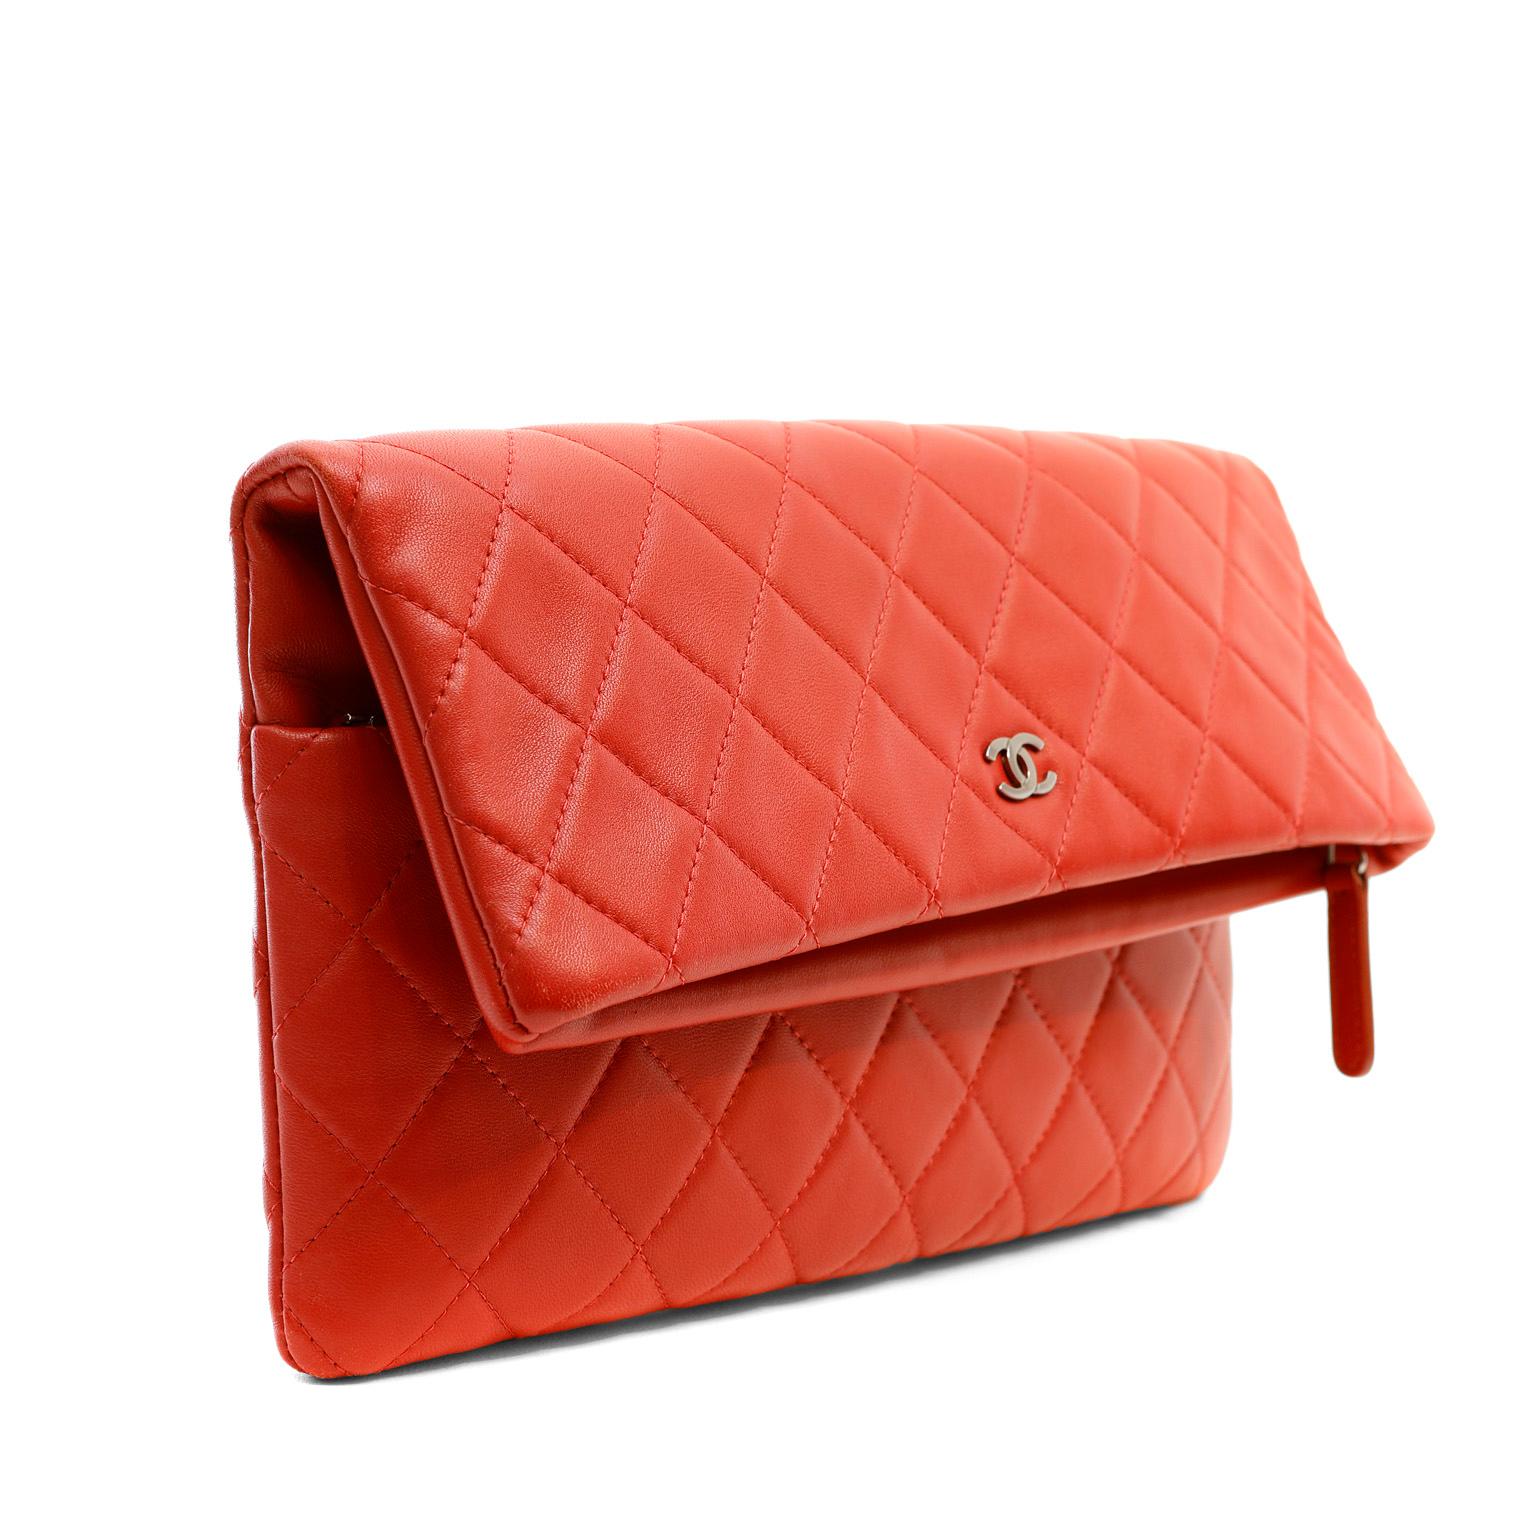 This authentic Chanel Red Quilted Lambskin Foldover Clutch is in pristine condition appearing never carried.  Bright lipstick red lambskin is quilted in signature Chanel diamond pattern.  Secure silver tone zippered top with foldover. Dust bag